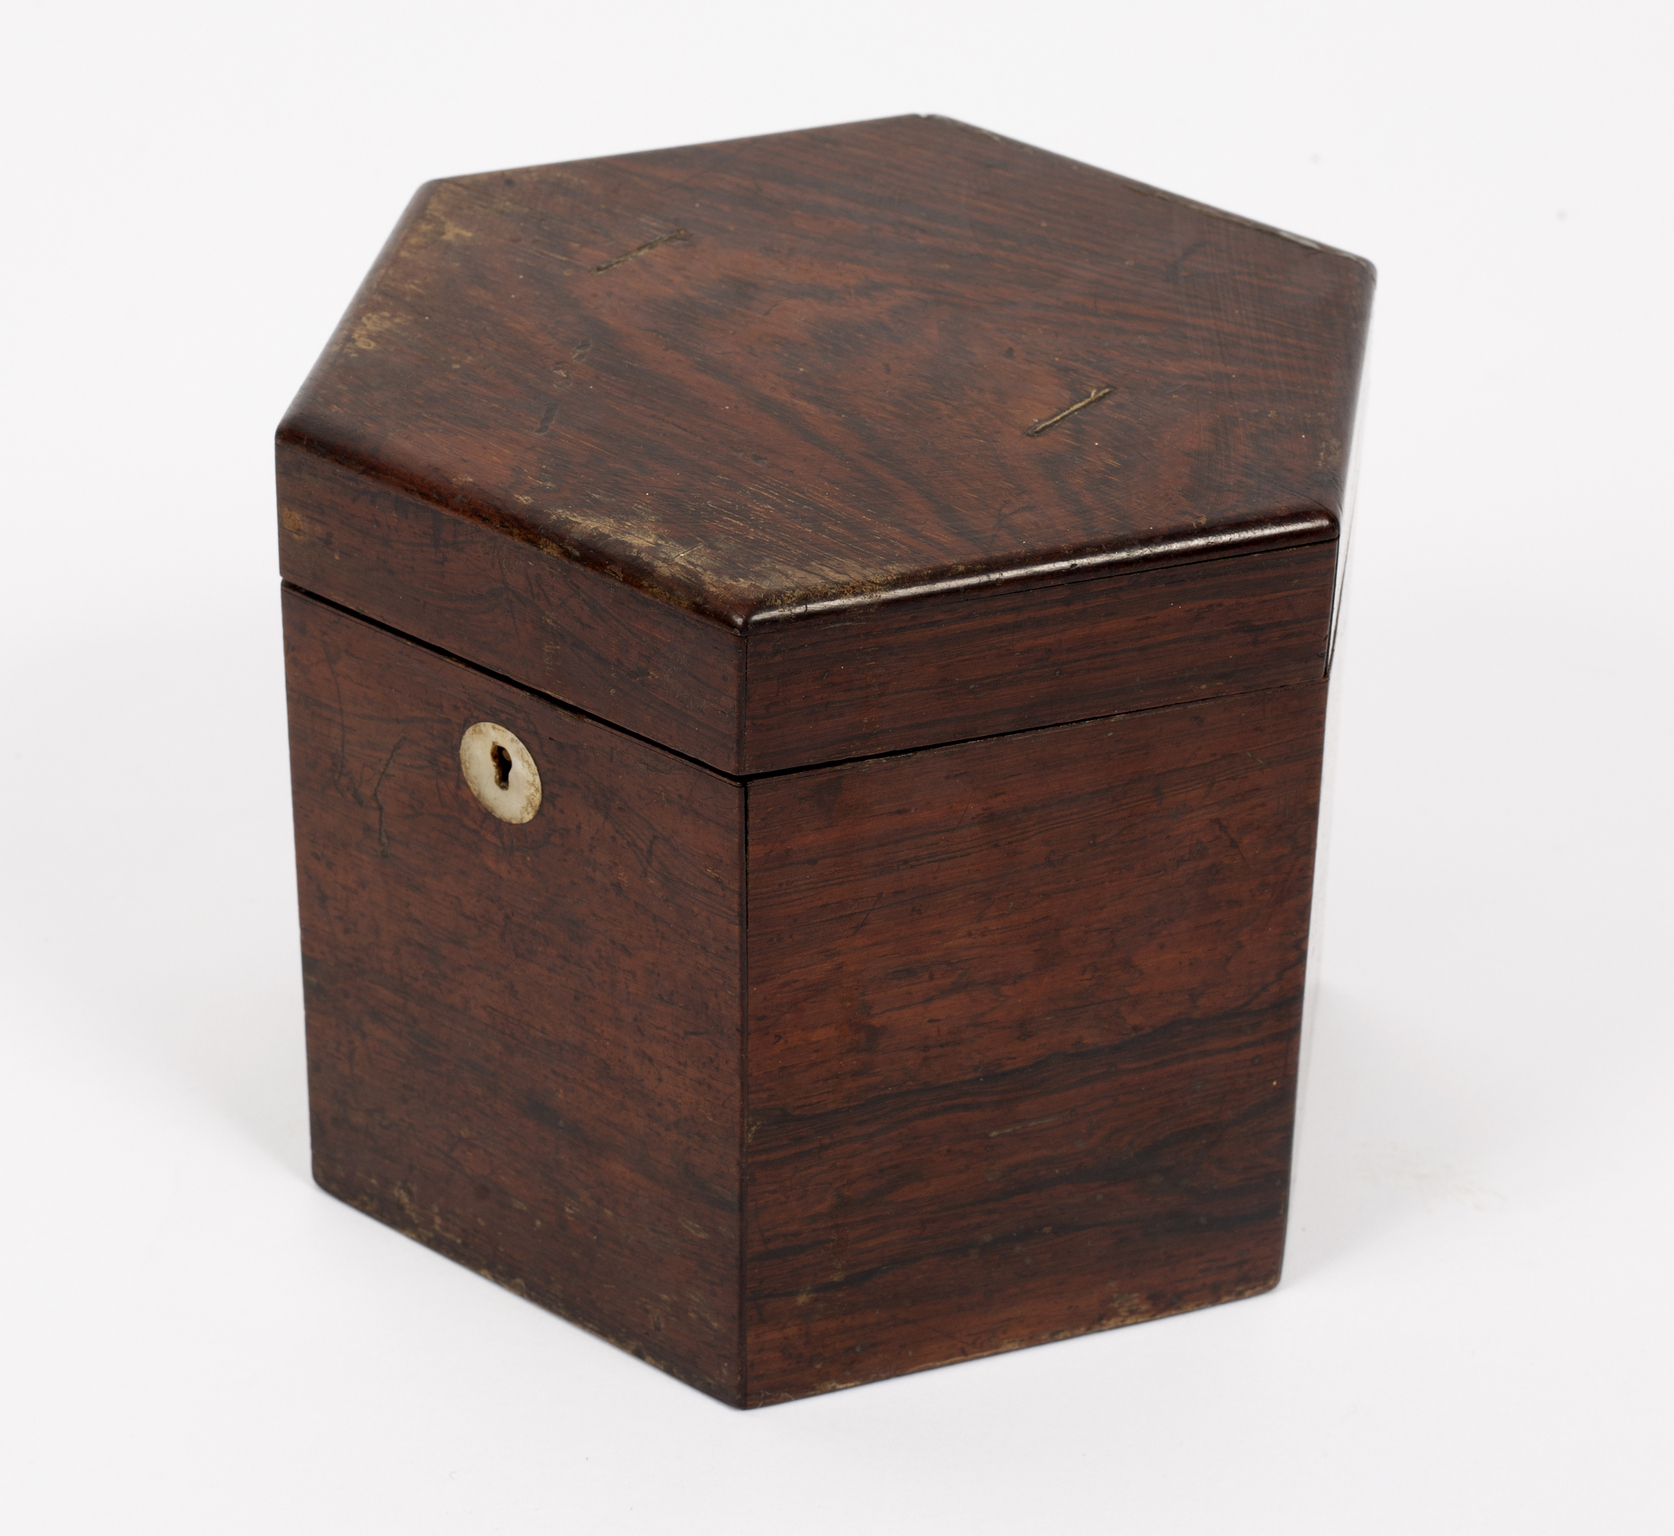 A rosewood cased 48 key concertina, by Charles Wheatstone, in original fitted hexagonal box, - Image 4 of 8